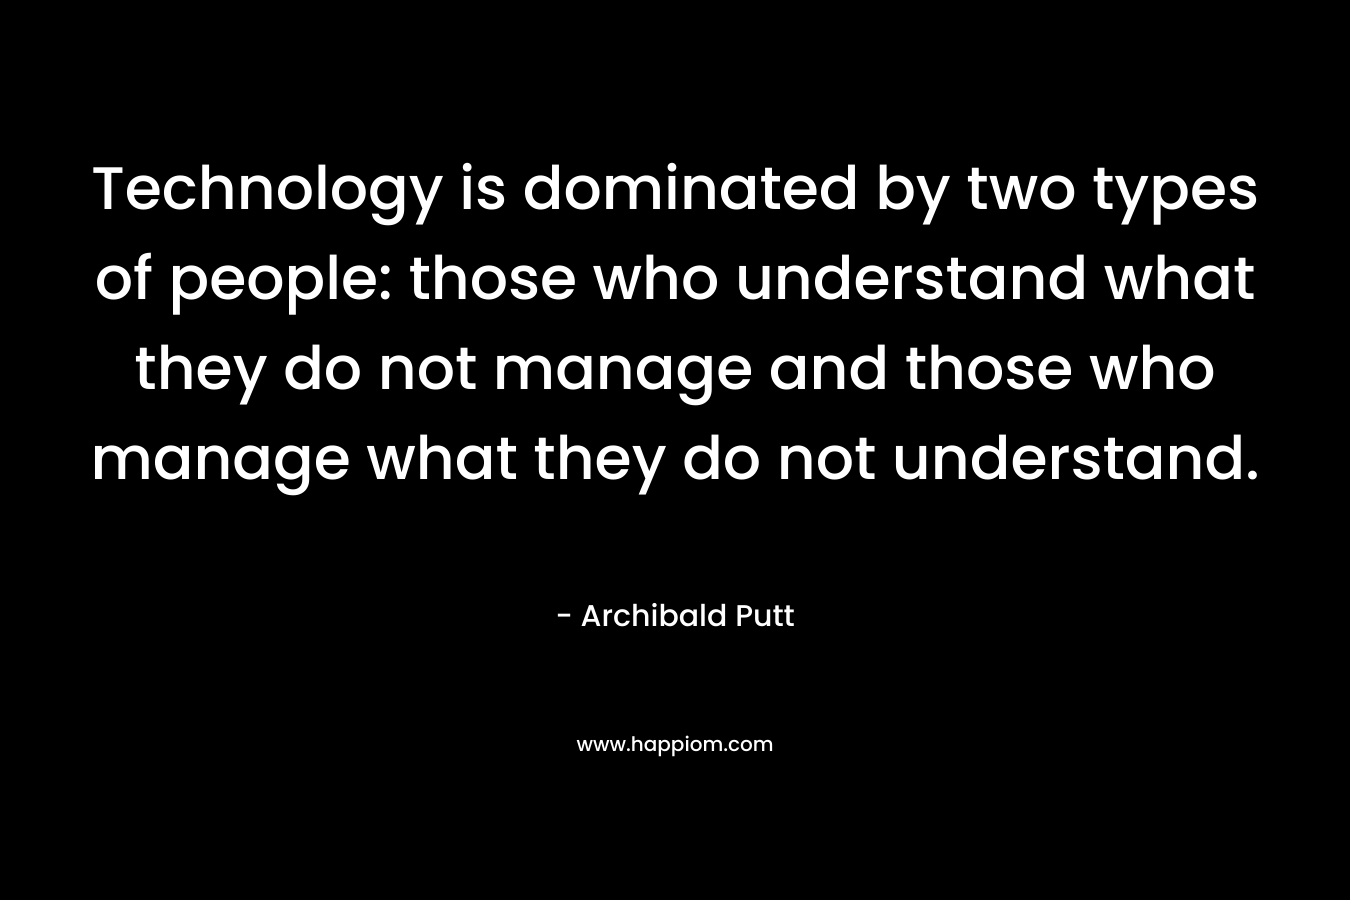 Technology is dominated by two types of people: those who understand what they do not manage and those who manage what they do not understand.